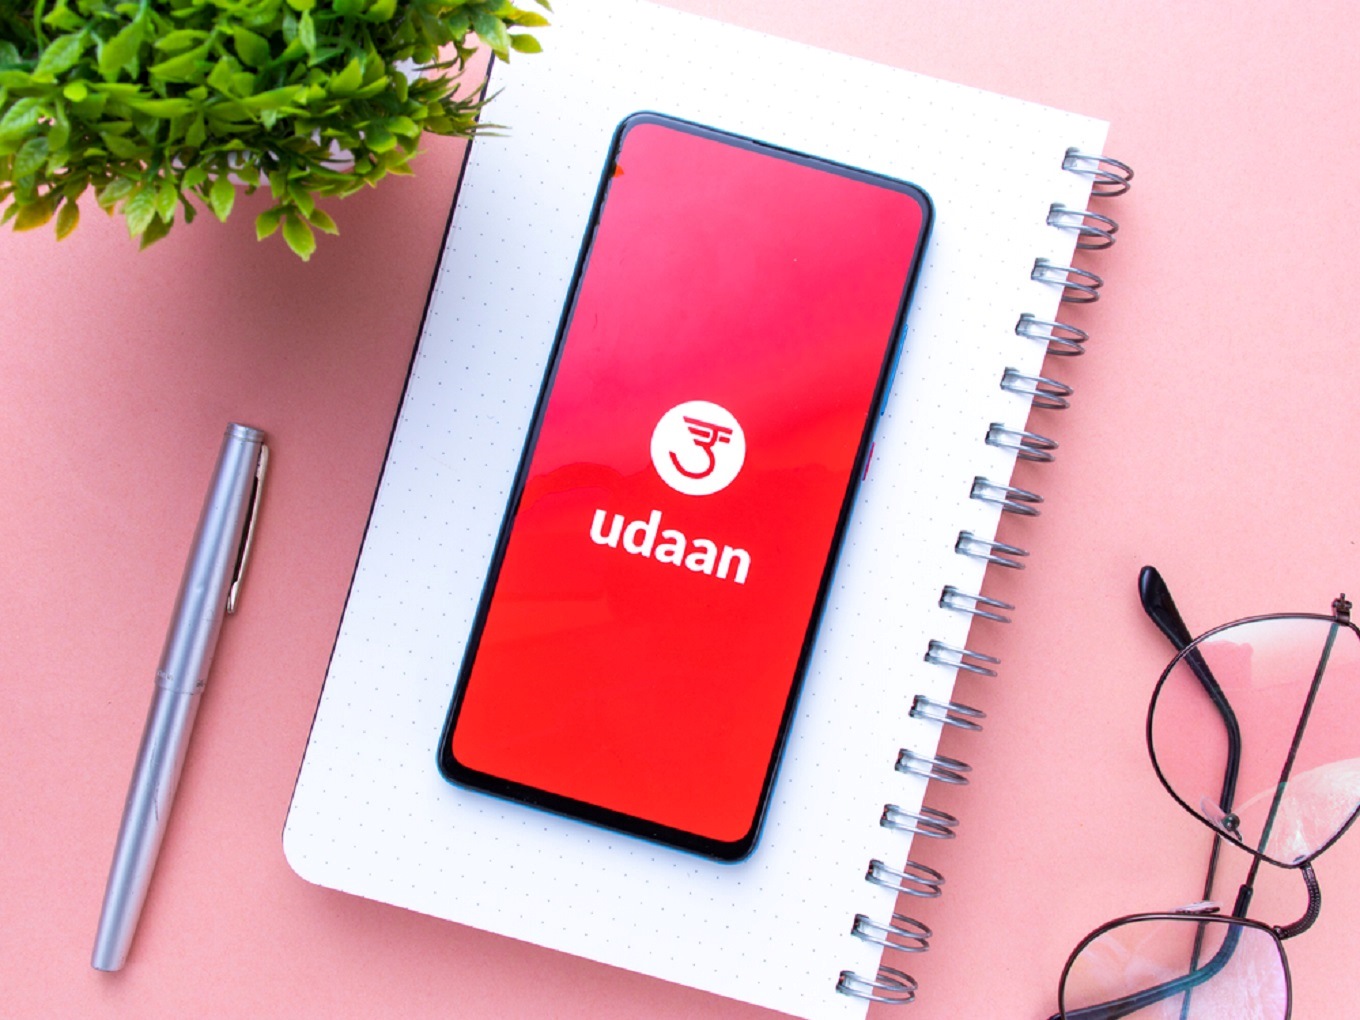 Udaan Secures $340 Million In New Funding Led By M&G